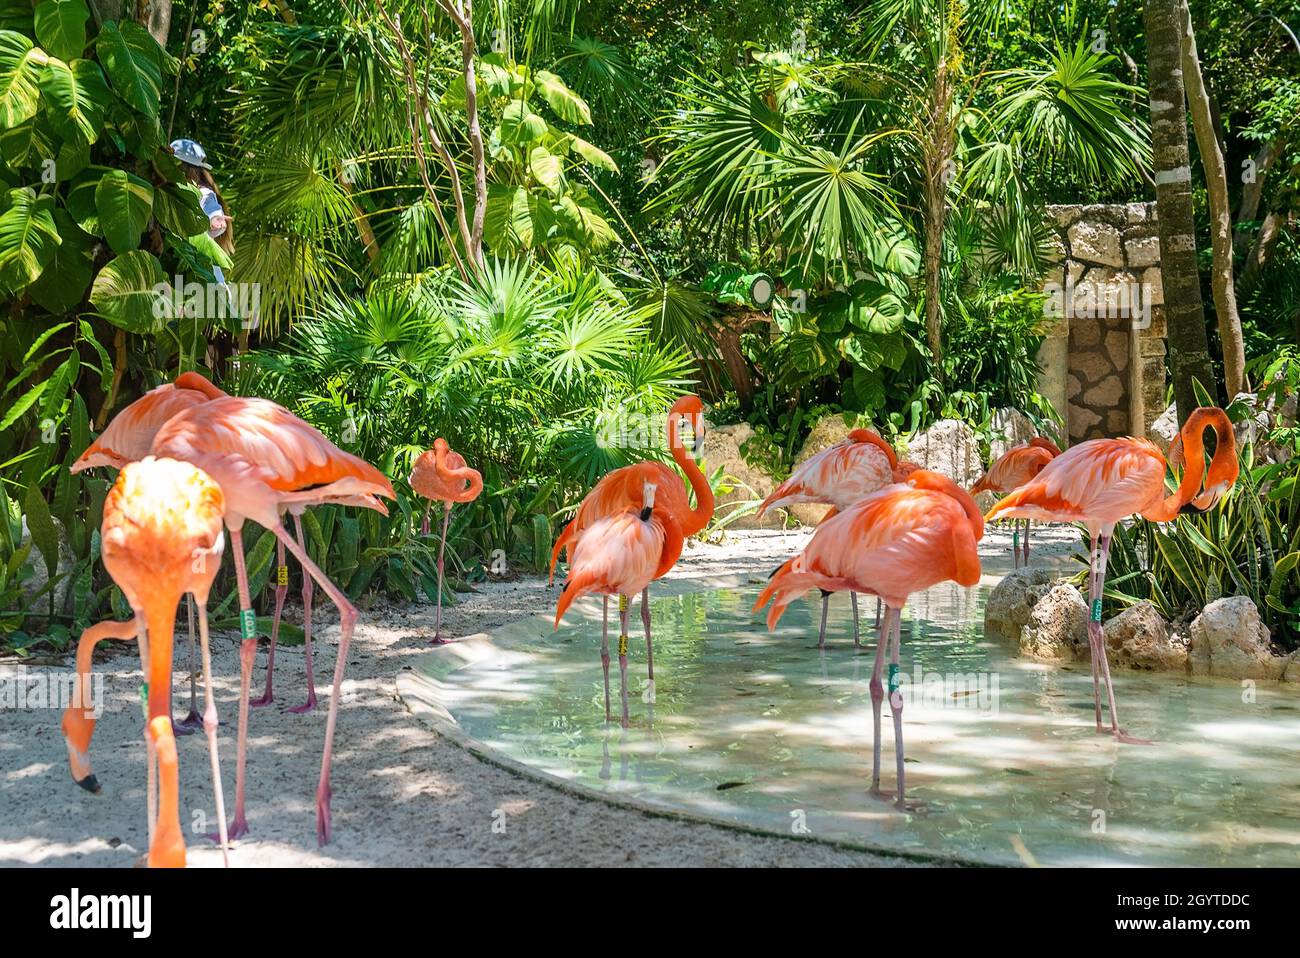 Flock of flamingos in water pond amidst trees at Xcaret eco park Stock Photo